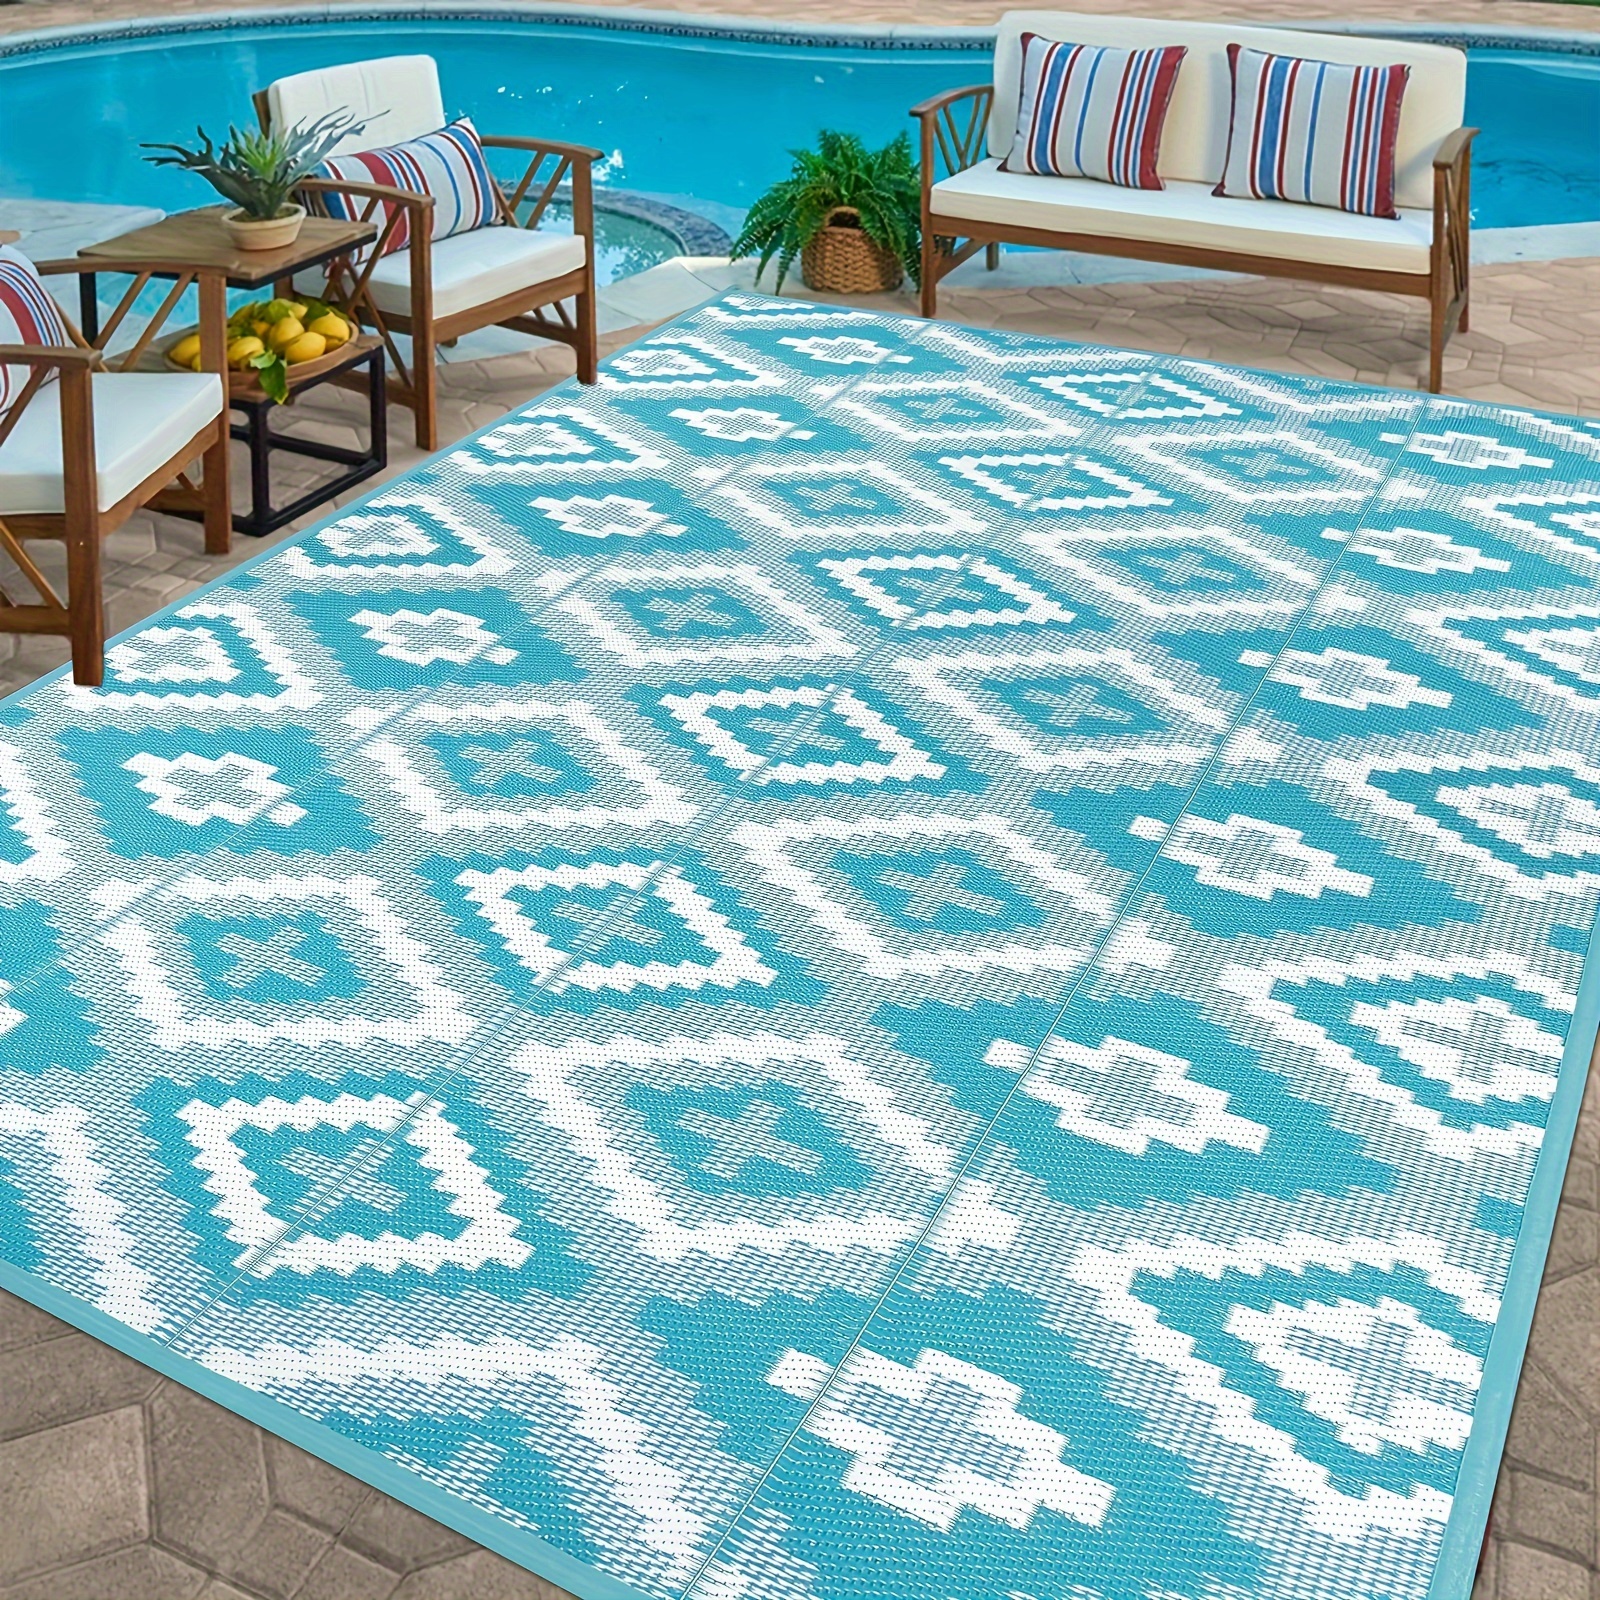 

Reversible Mat, Diamond Fade Resistant Plastic Straw Rug, Outdoor Plastic Patio Rug, Lightweight Stain Proof Carpet For Patio, Rv, Camping, Beach, Deck, Backyard And Picnic